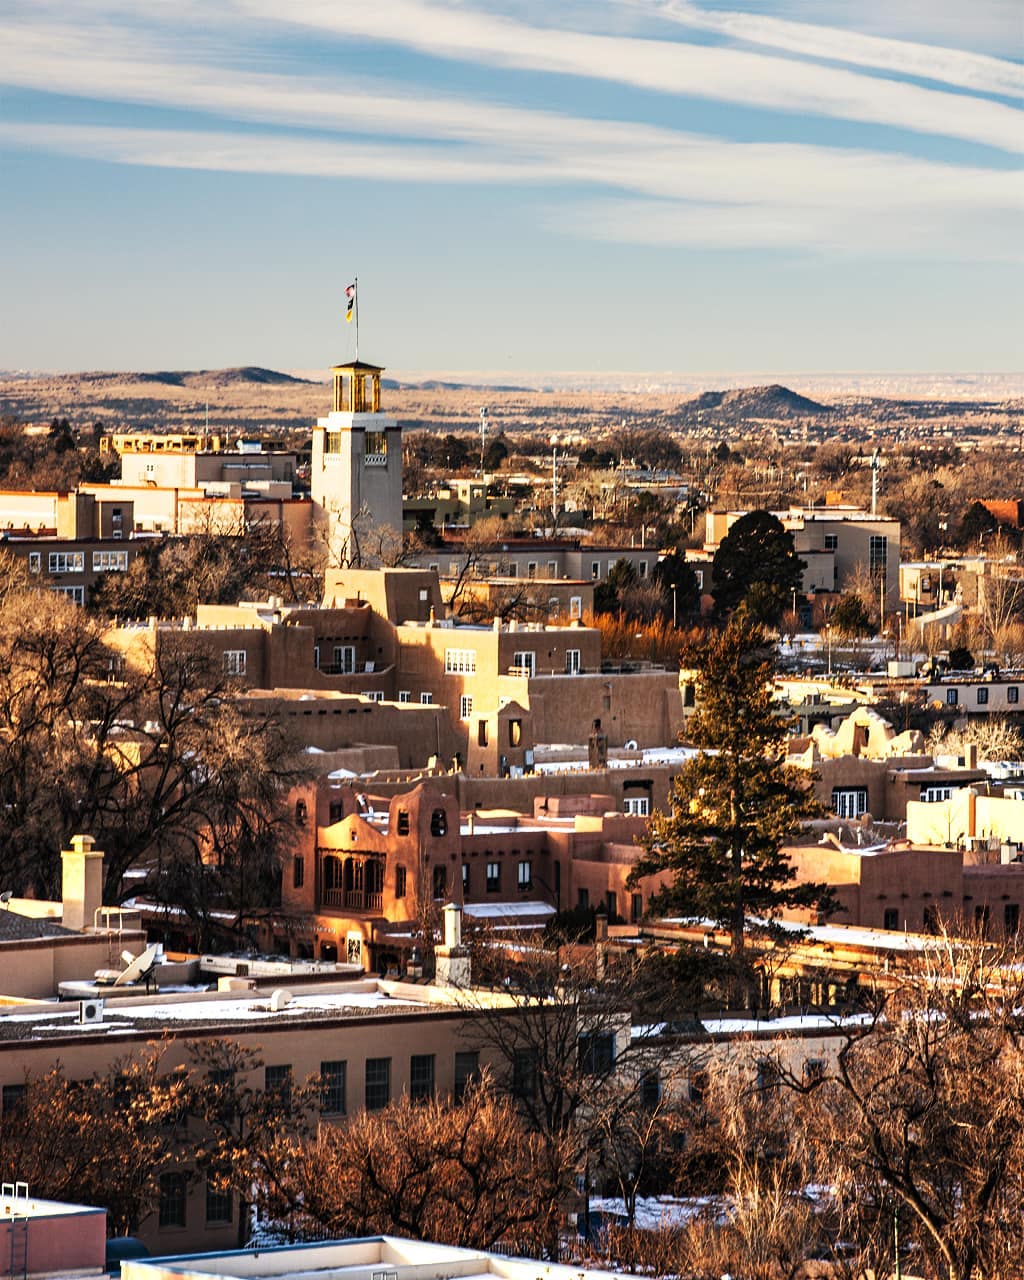 downtown santa fe new mexico photo by Instagram user @travlinphoto